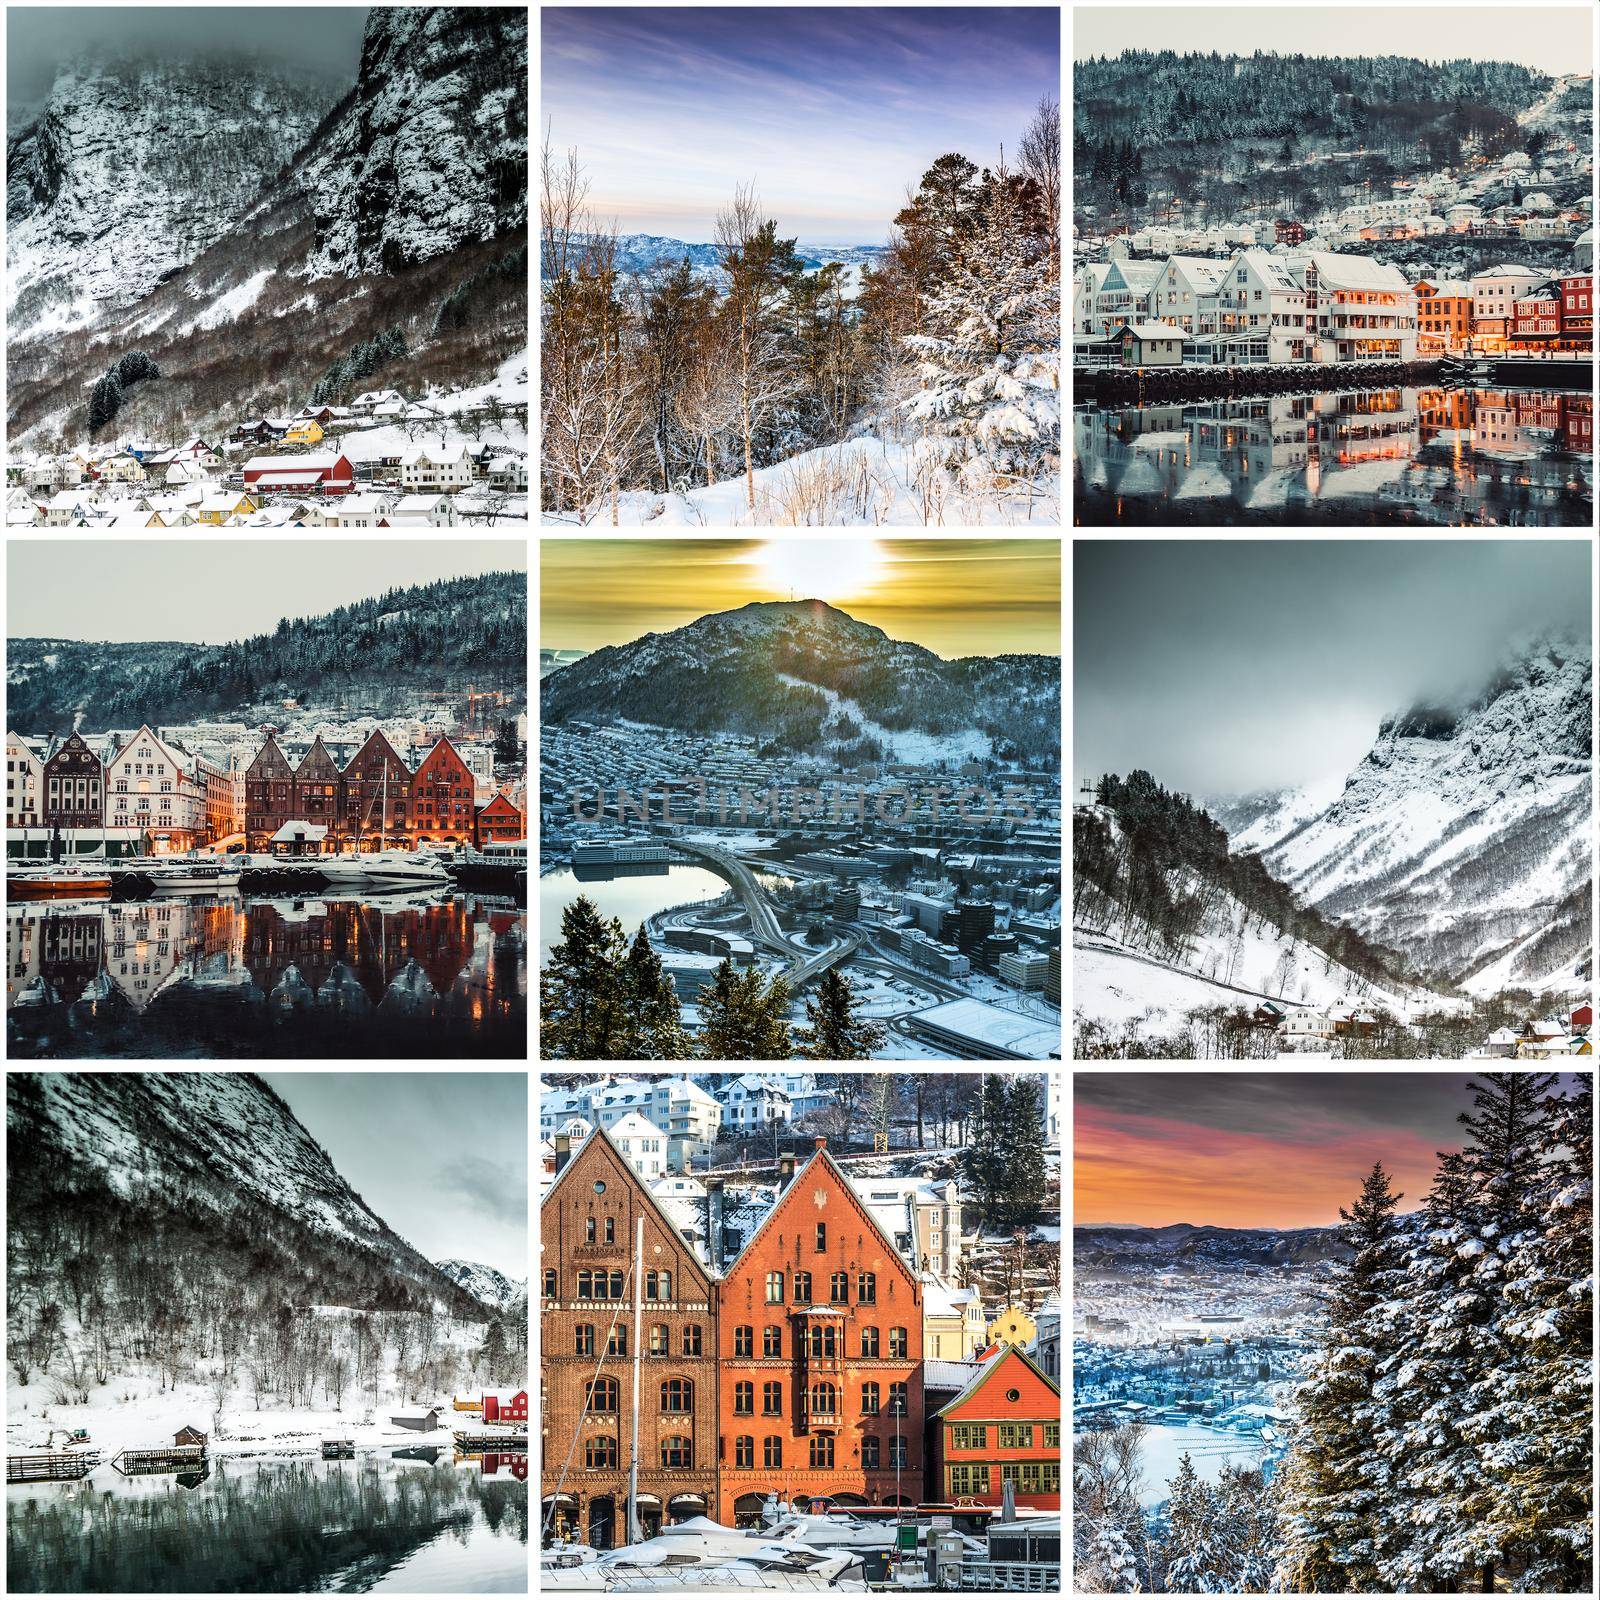 Collage of photos from Bergen by tan4ikk1